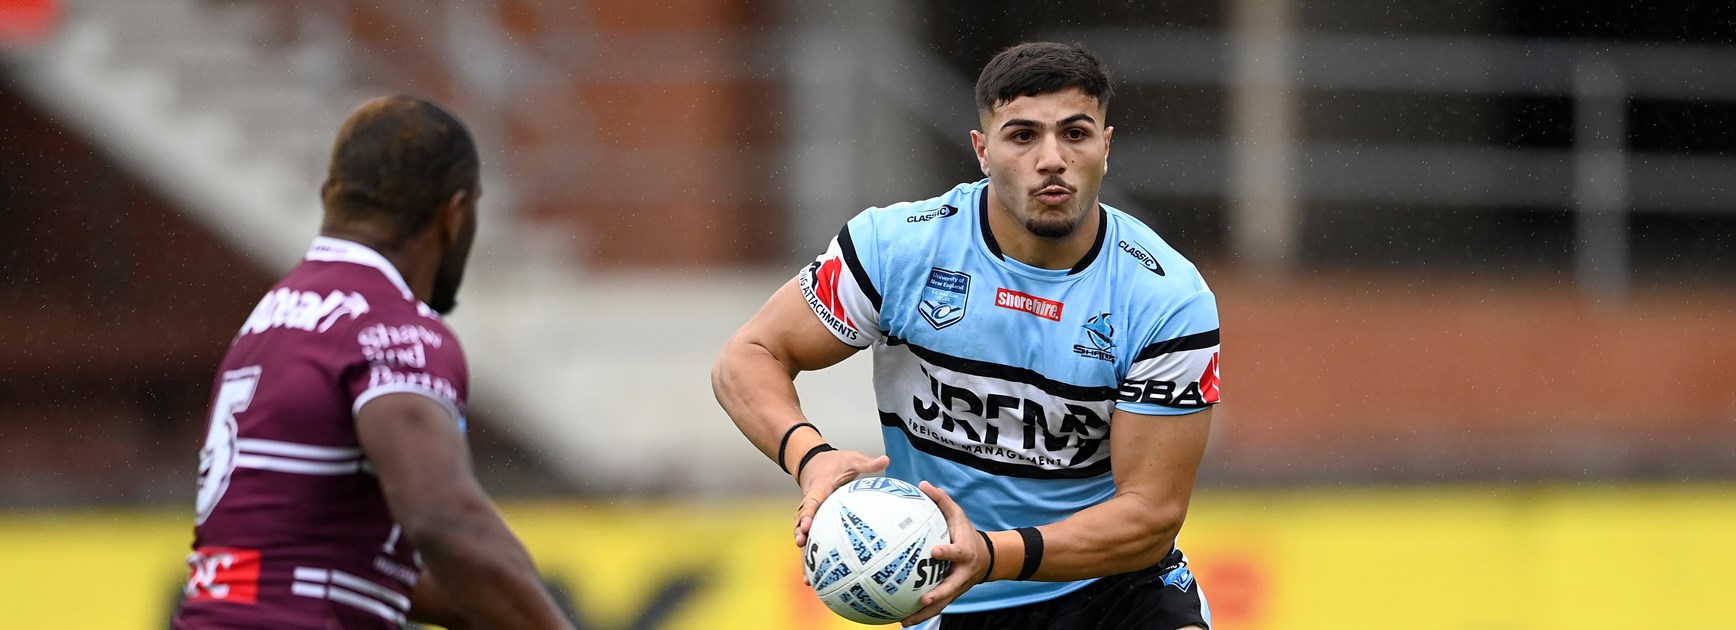 Rising Sharks stars selected in NSW 19s Origin squads